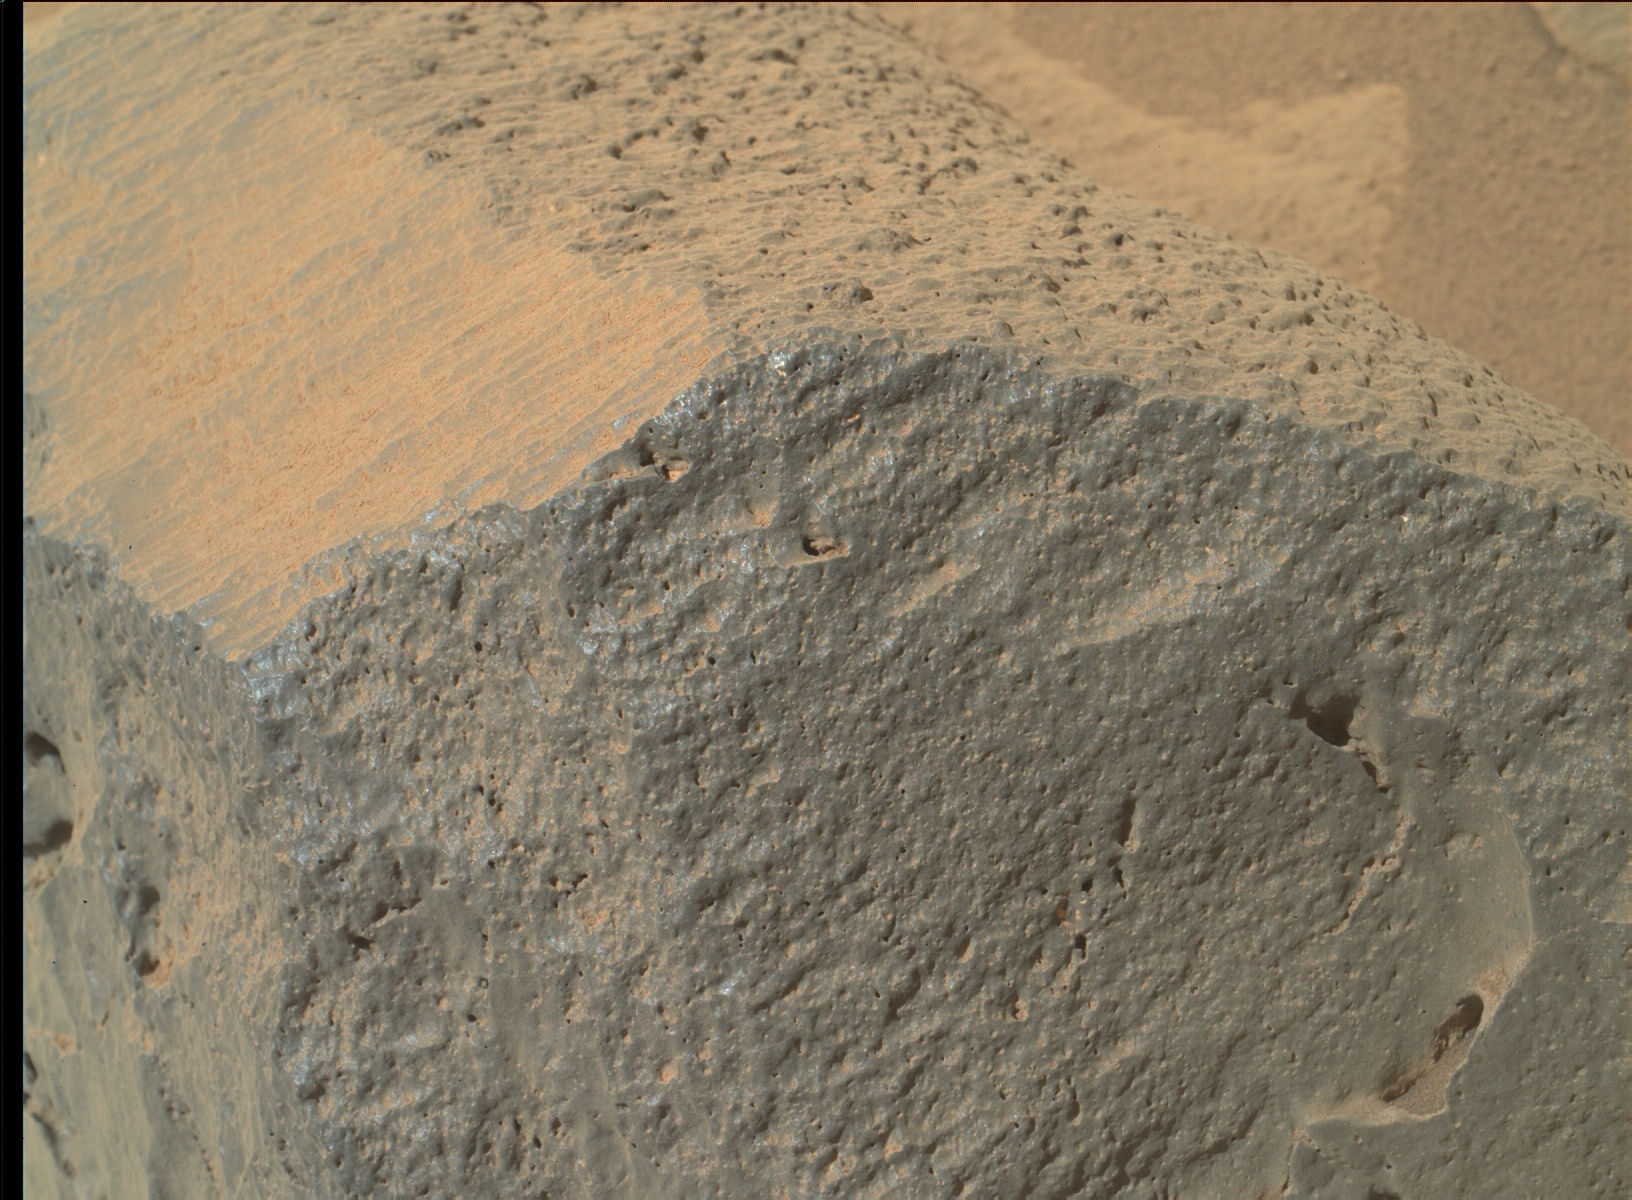 Nasa's Mars rover Curiosity acquired this image using its Mars Hand Lens Imager (MAHLI) on Sol 706